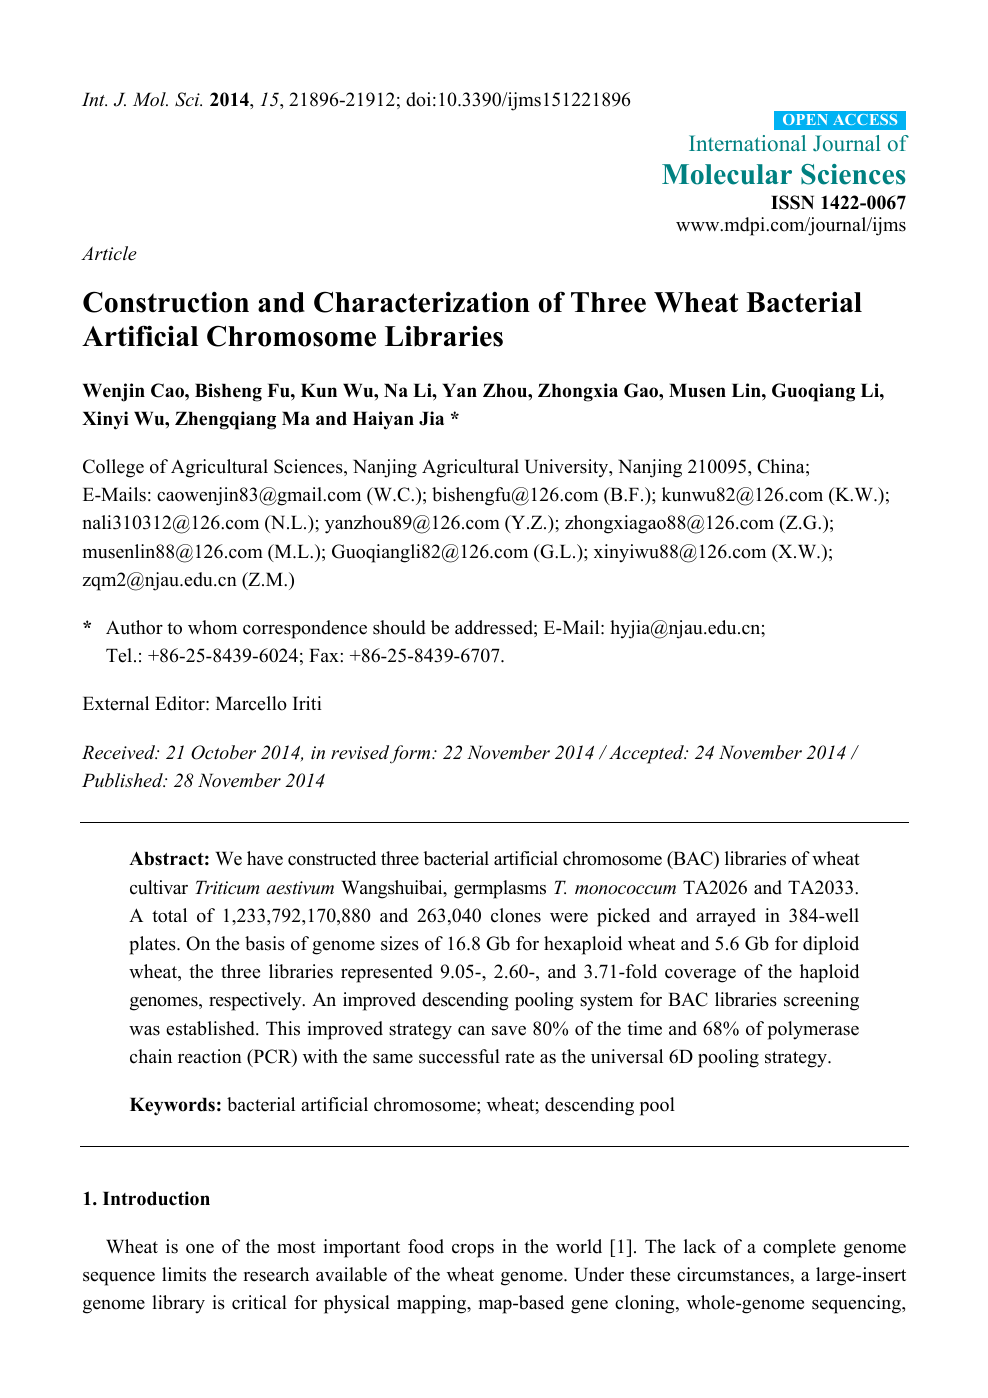 Construction And Characterization Of Three Wheat Bacterial Artificial Chromosome Libraries Topic Of Research Paper In Biological Sciences Download Scholarly Article Pdf And Read For Free On Cyberleninka Open Science Hub